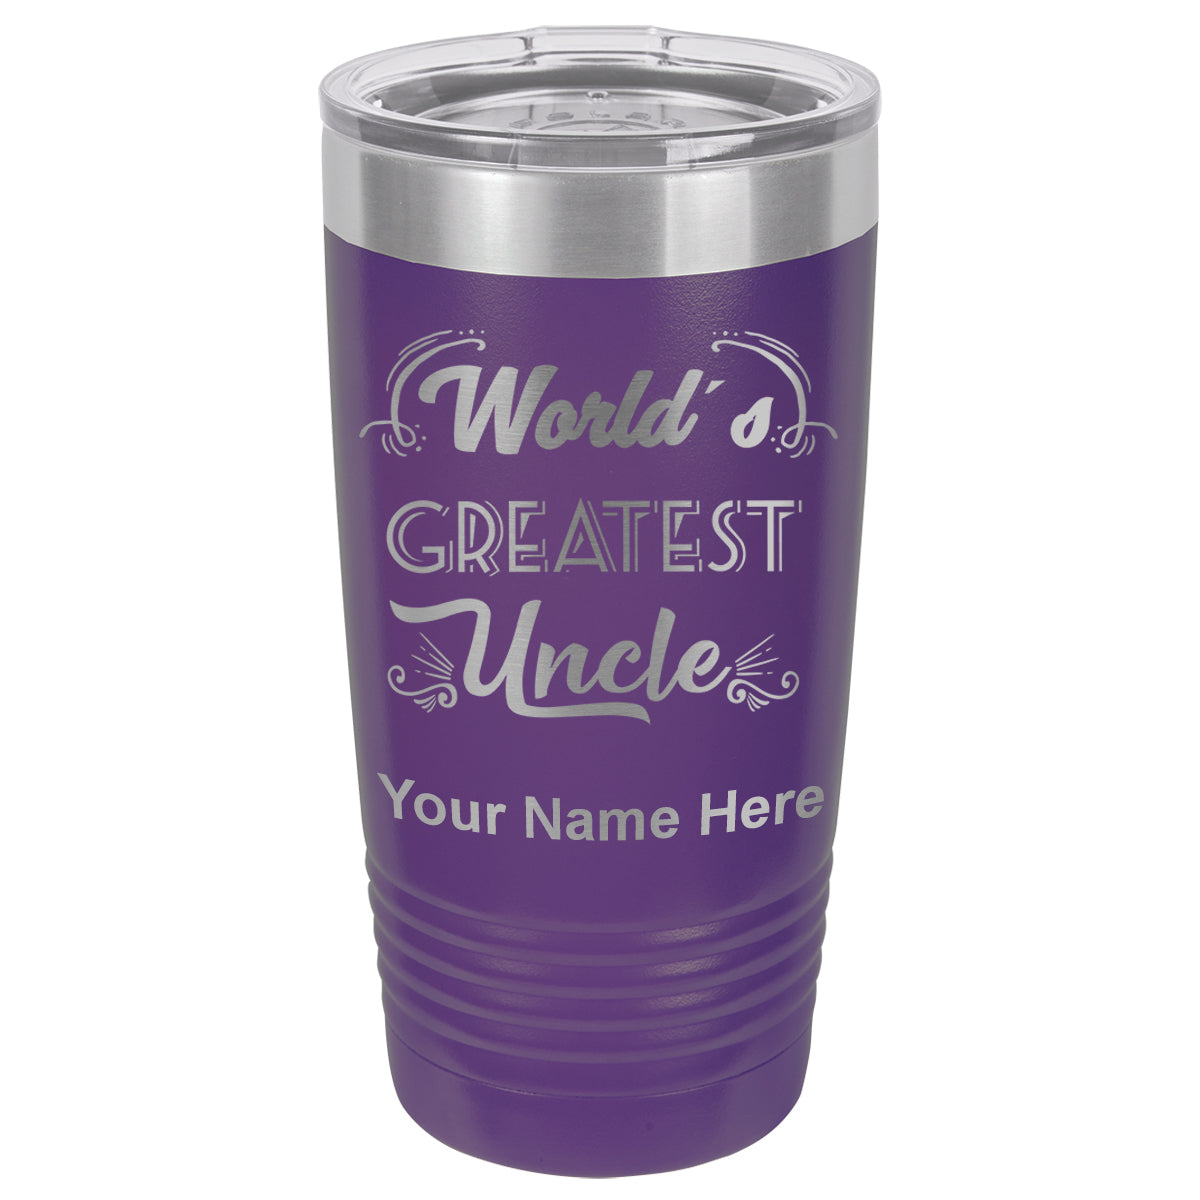 20oz Vacuum Insulated Tumbler Mug, World's Greatest Uncle, Personalized Engraving Included